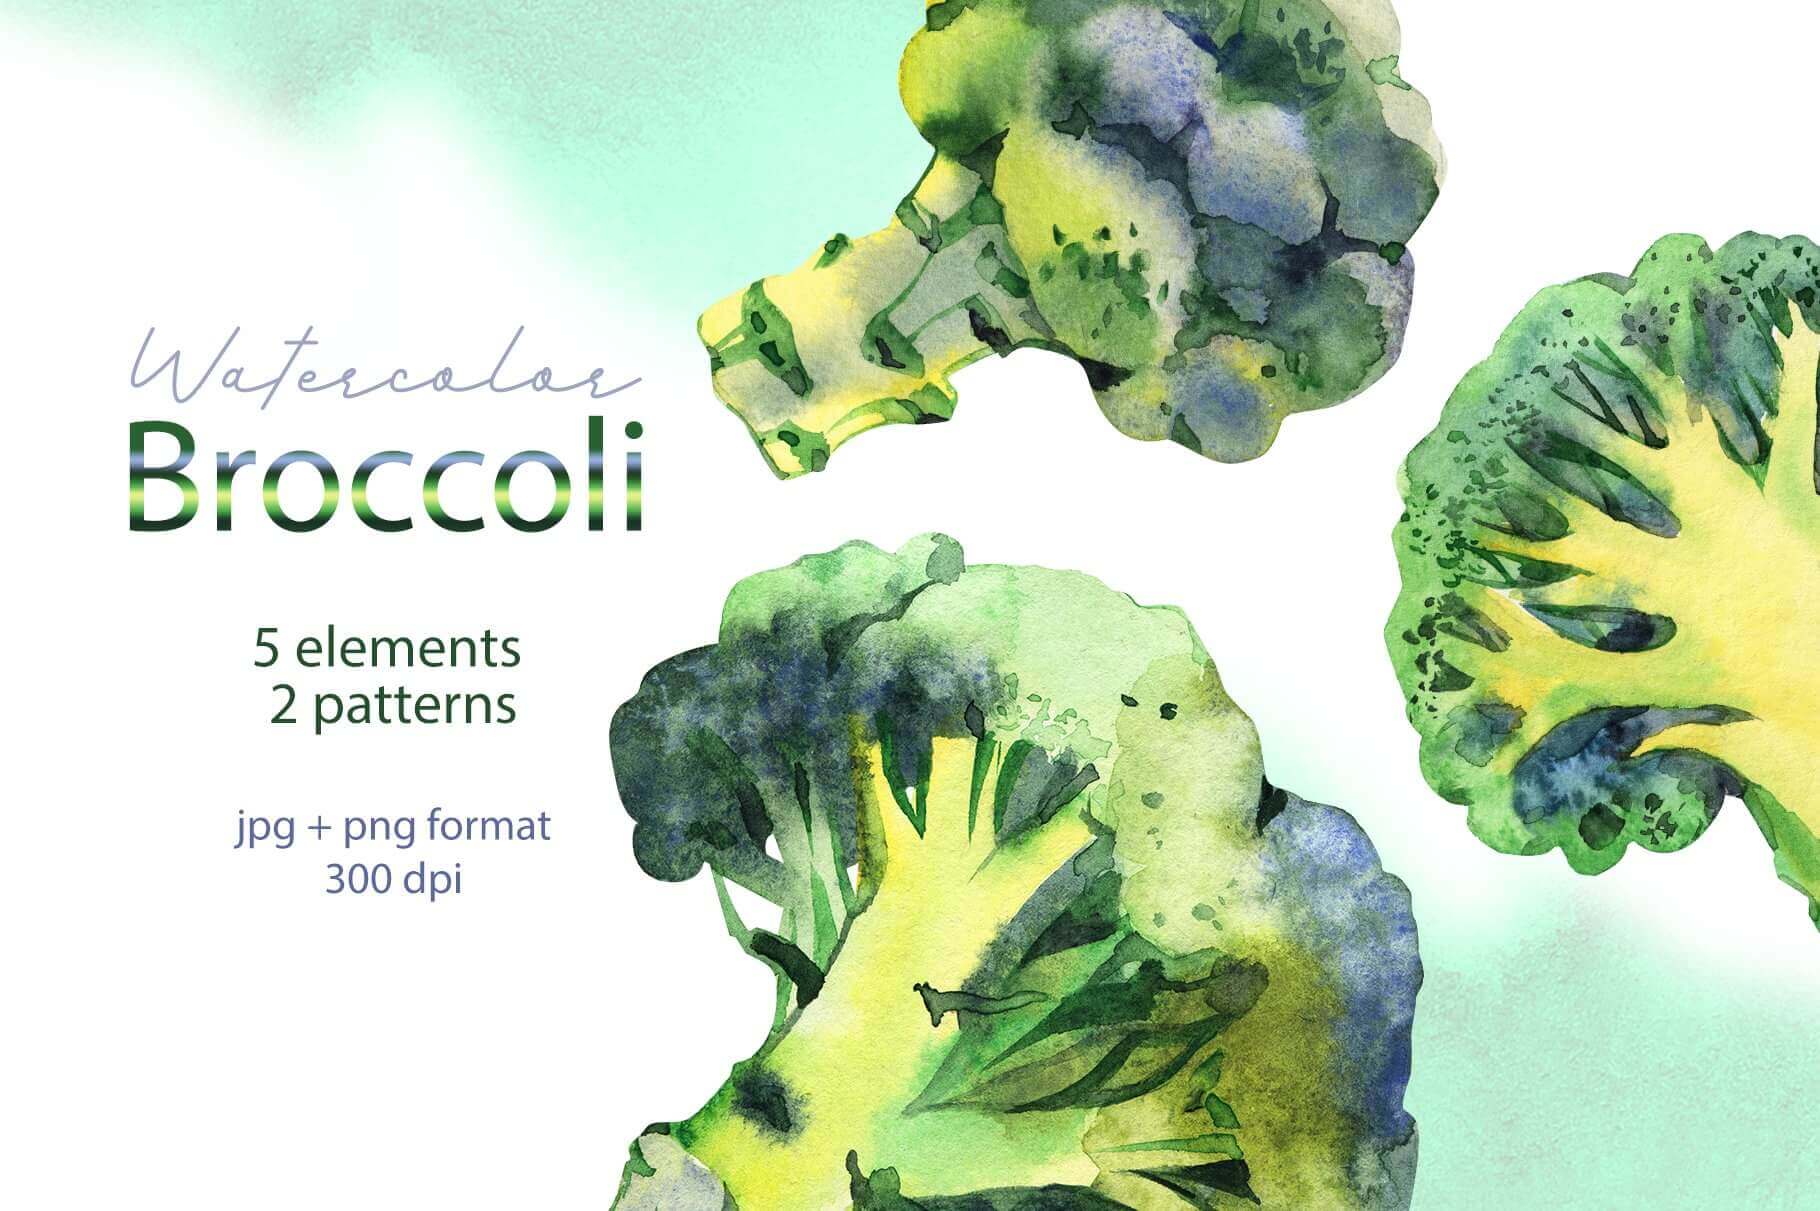 5 elements and 2 patterns of watercolor broccoli.